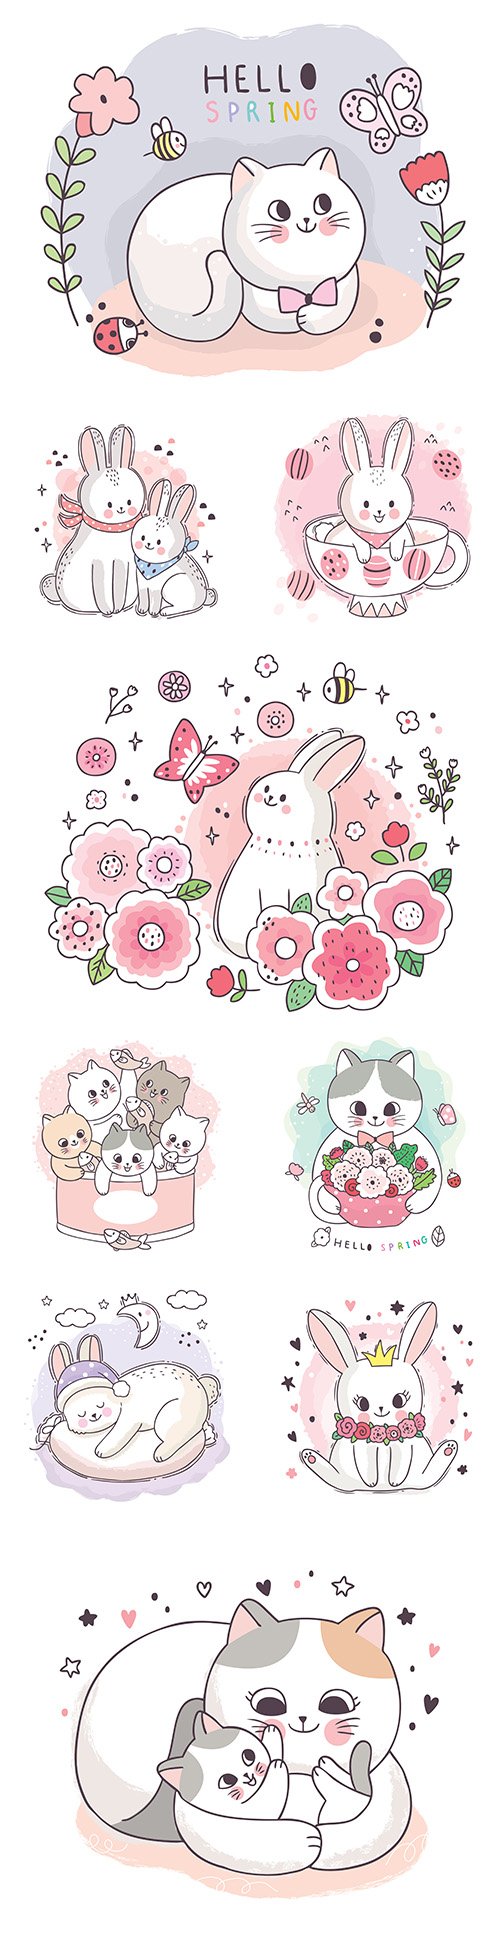 Cute kitten and Easter bunny cartoon painted illustrations